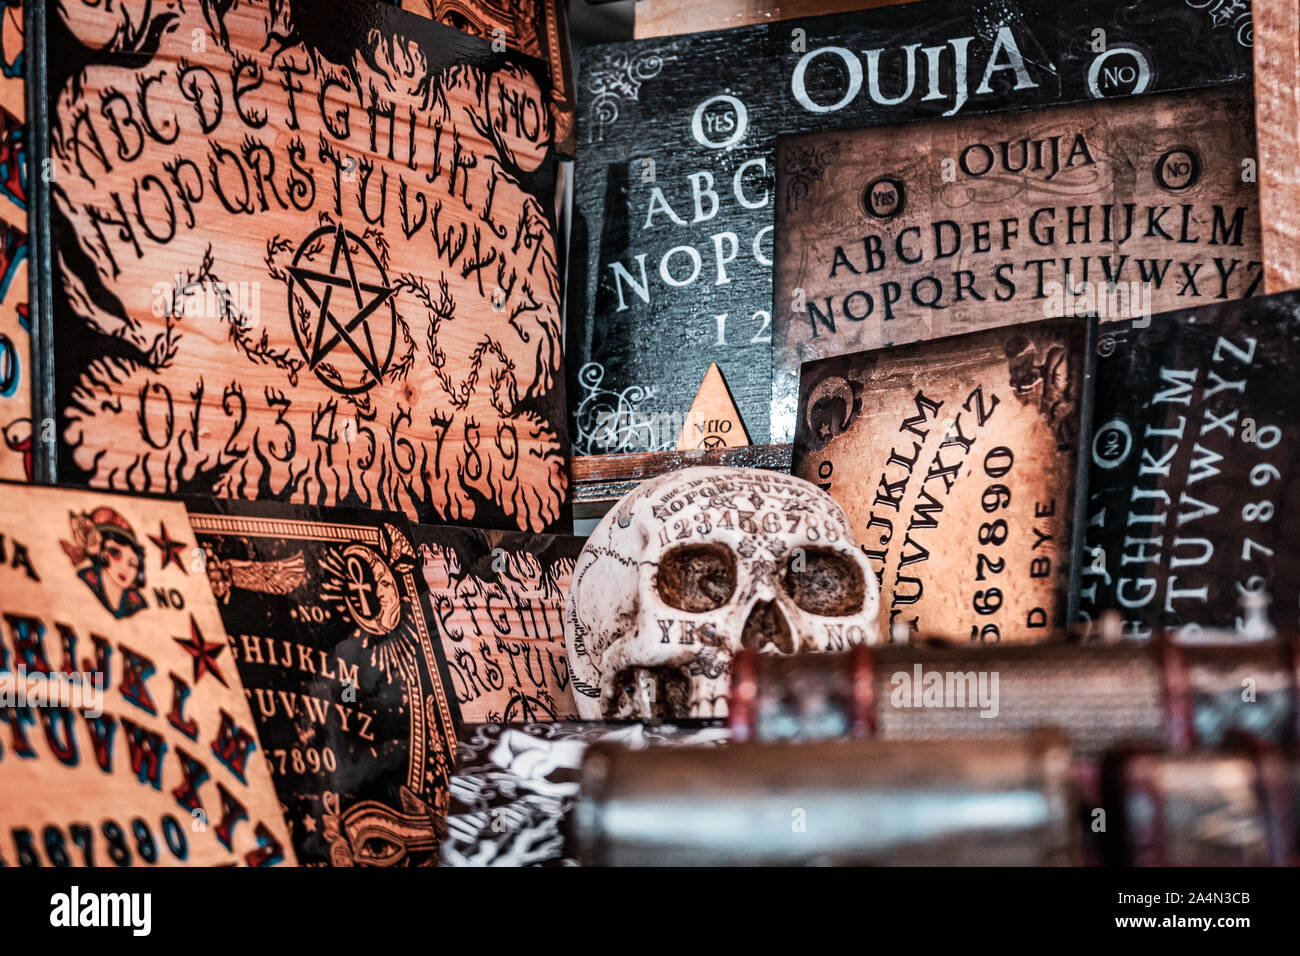 Talking board and planchette, also known as the Ouija board, used for communicating with the dead and other spirits. Halloween background. White skull. Stock Photo